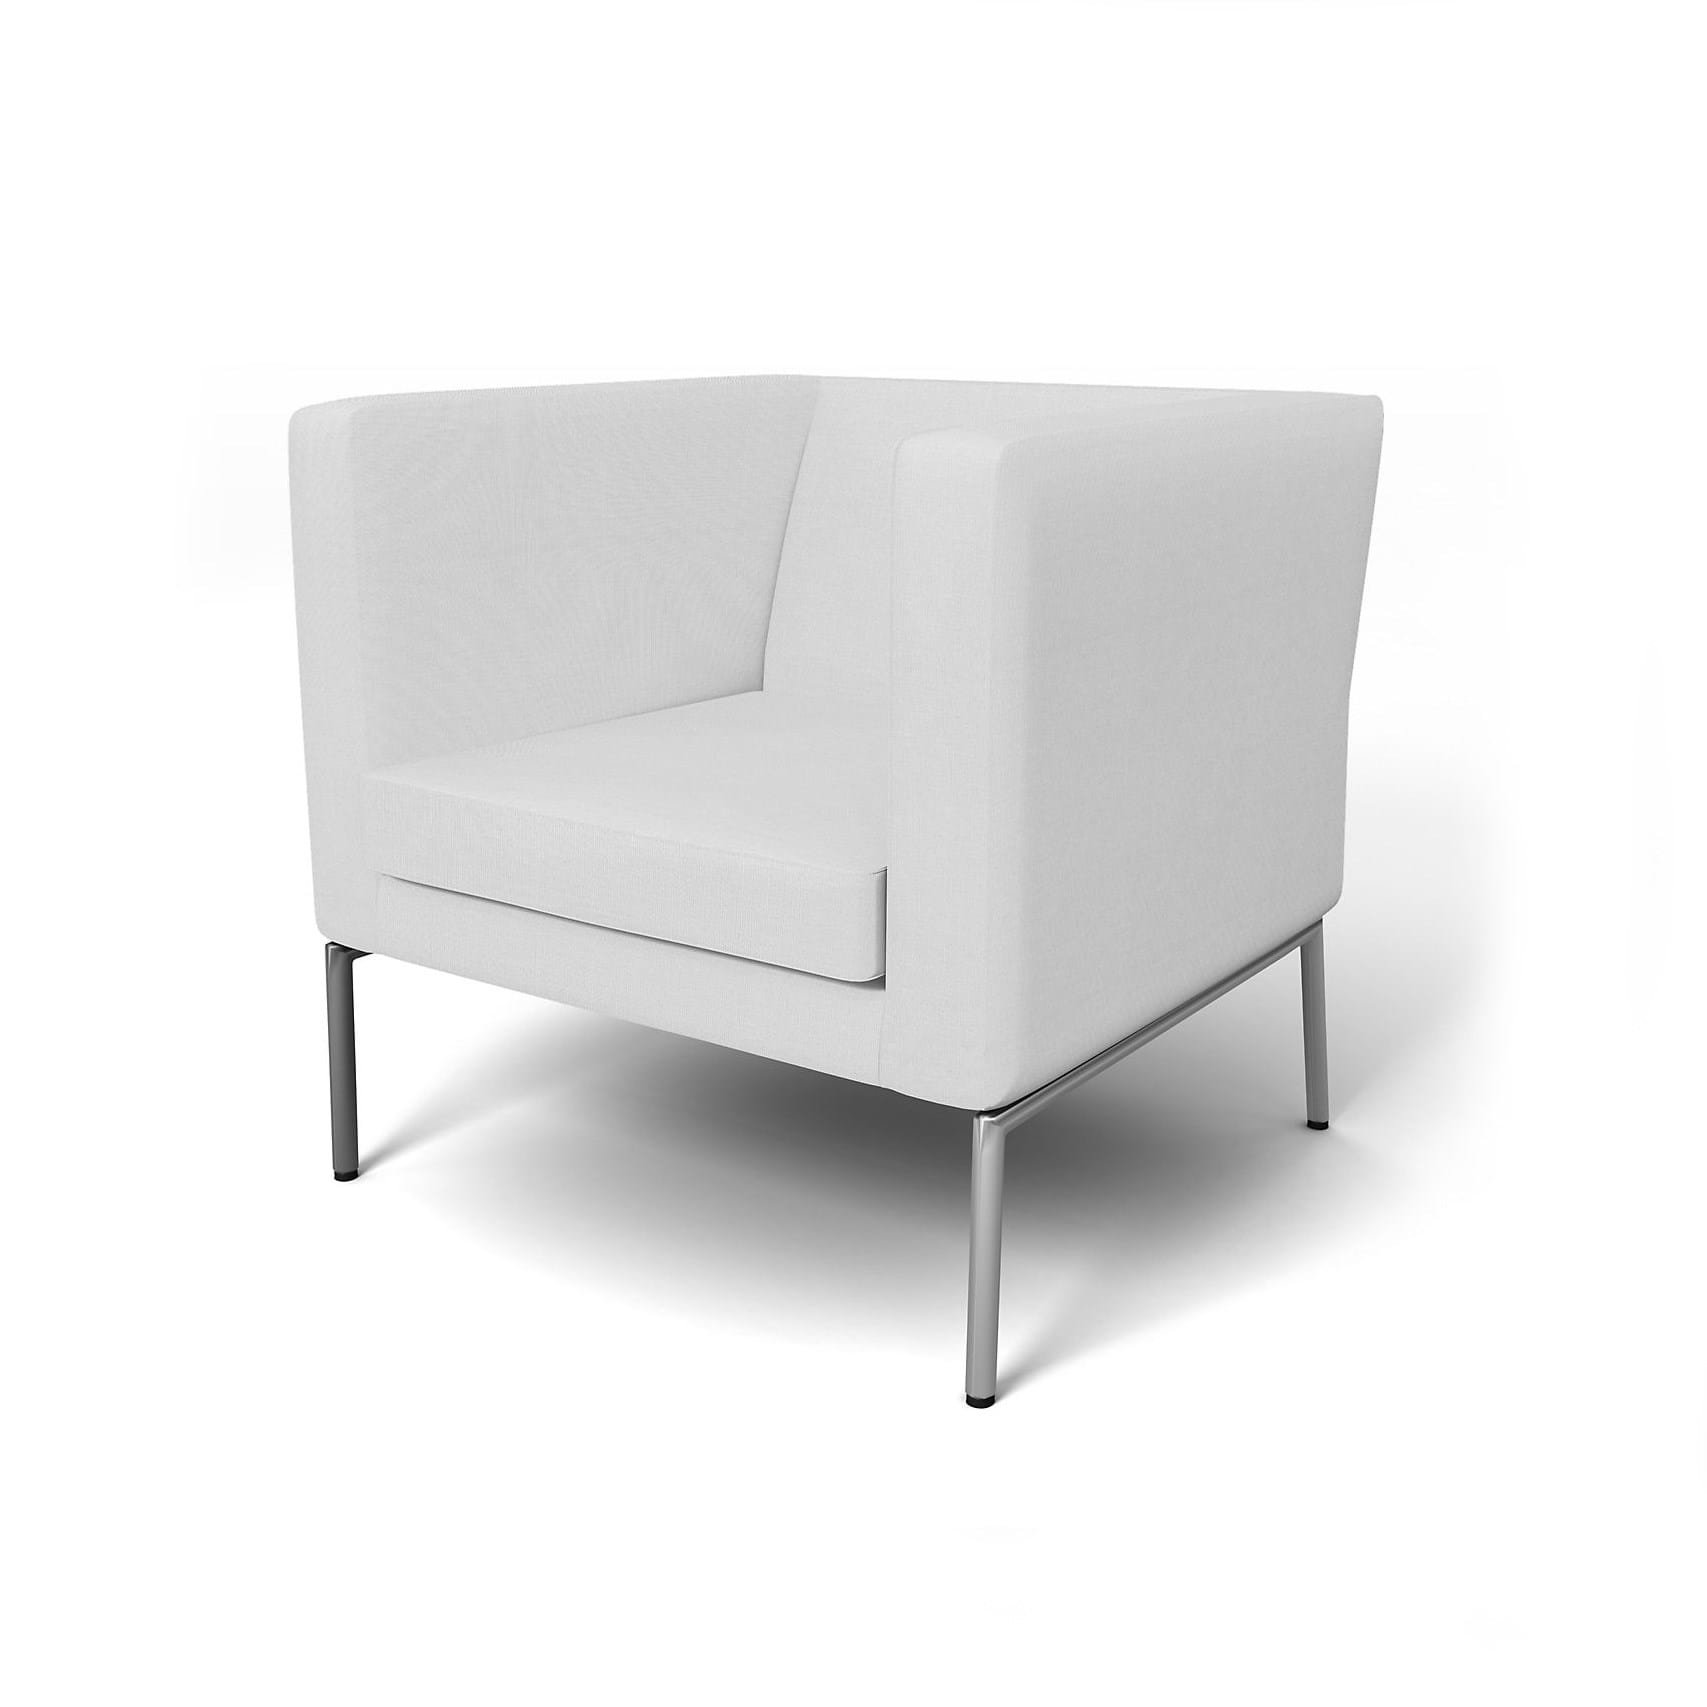 Custom Covers Slipcovers For Ikea Sofas Armchairs Couches